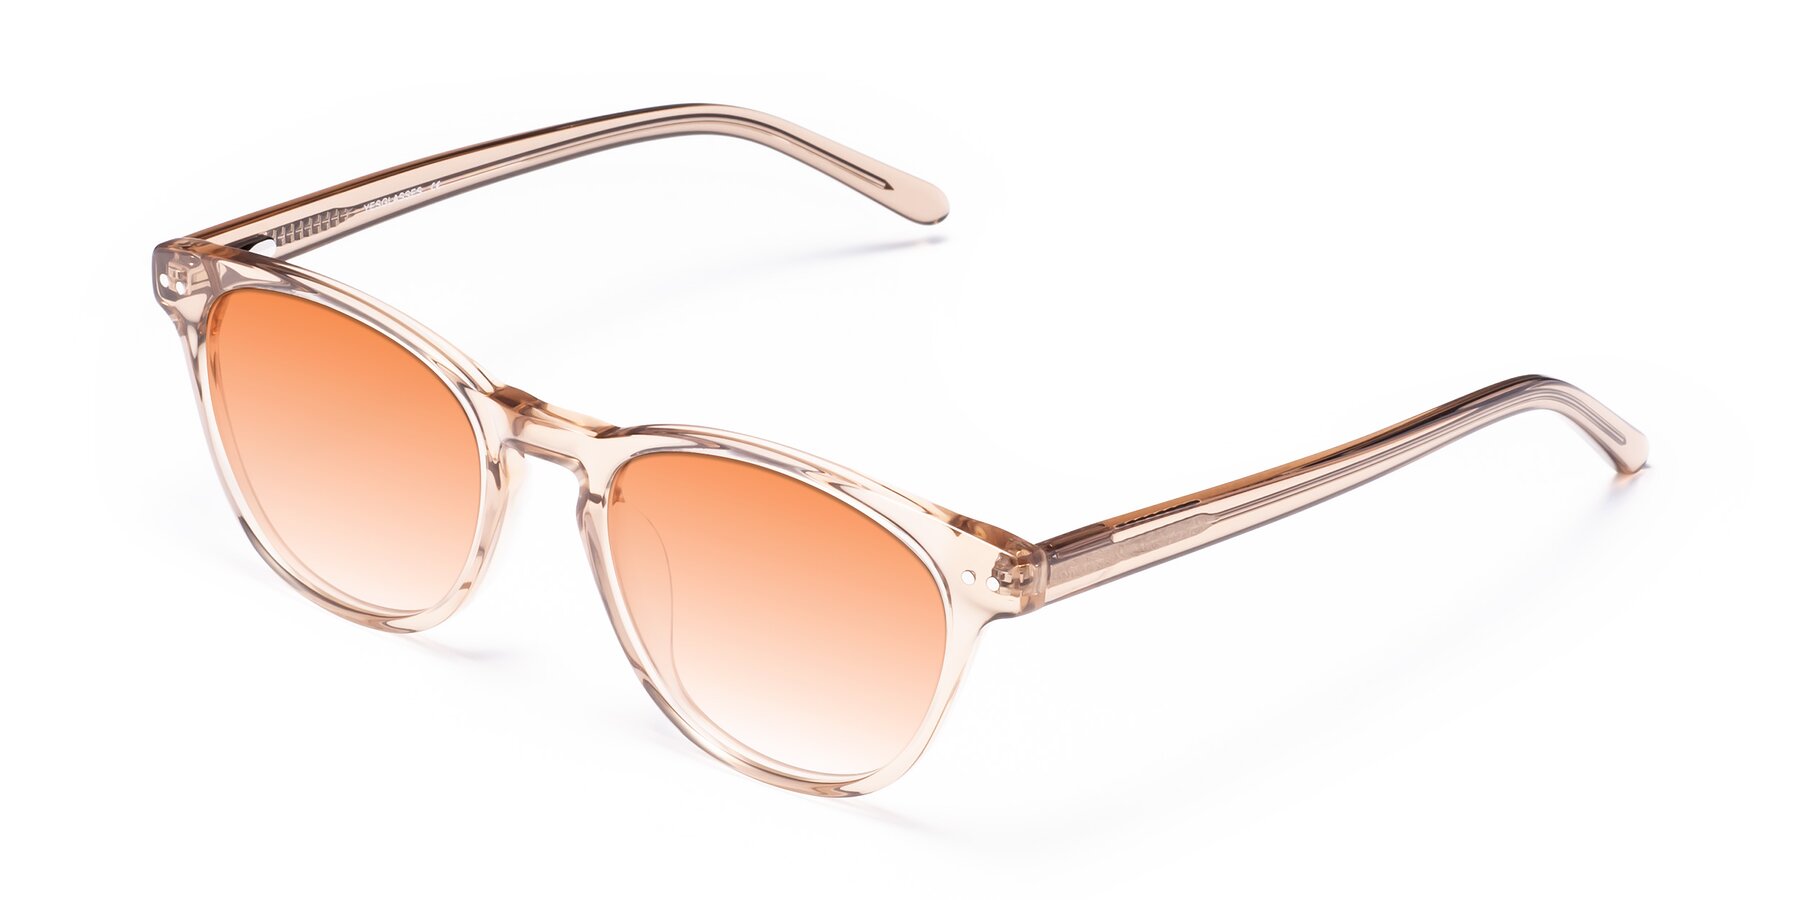 Angle of Blaze in light Brown with Orange Gradient Lenses